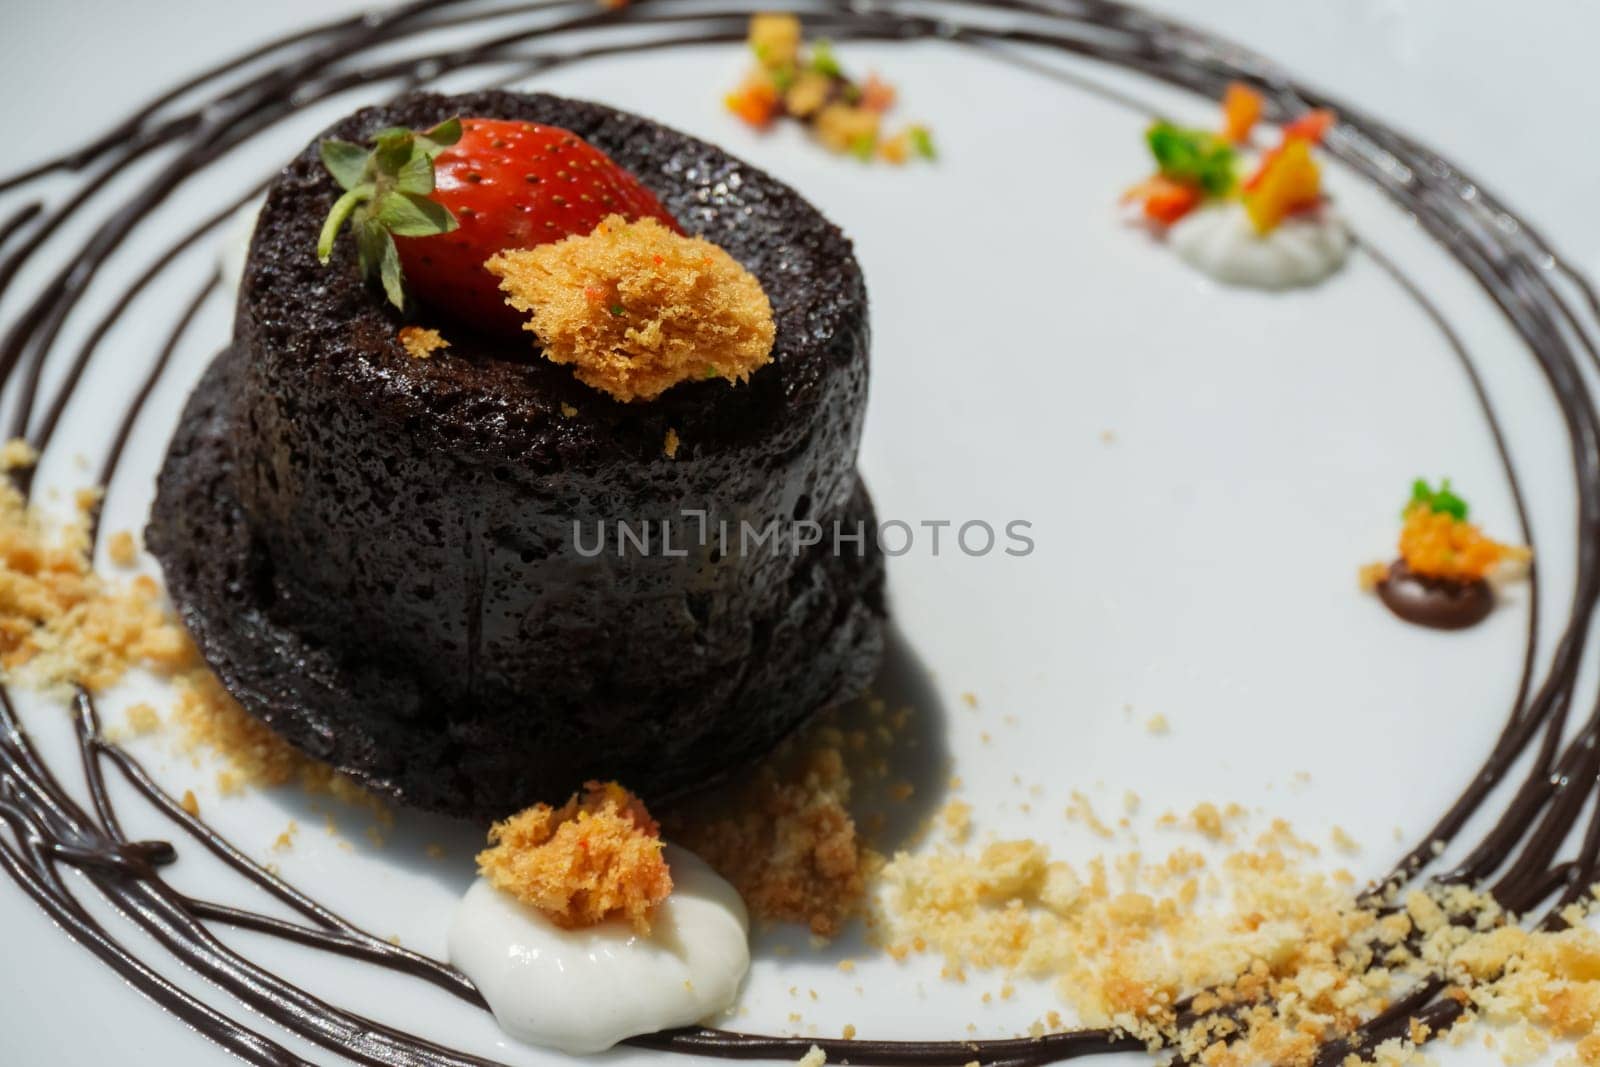 Delicious chocolate fondant or lava cake with cream, strawberry, and cake biscuit crumbles, Hot chocolate dessert pudding with liquid chocolate center, fondant au chocolate for cooking ideas and recipe